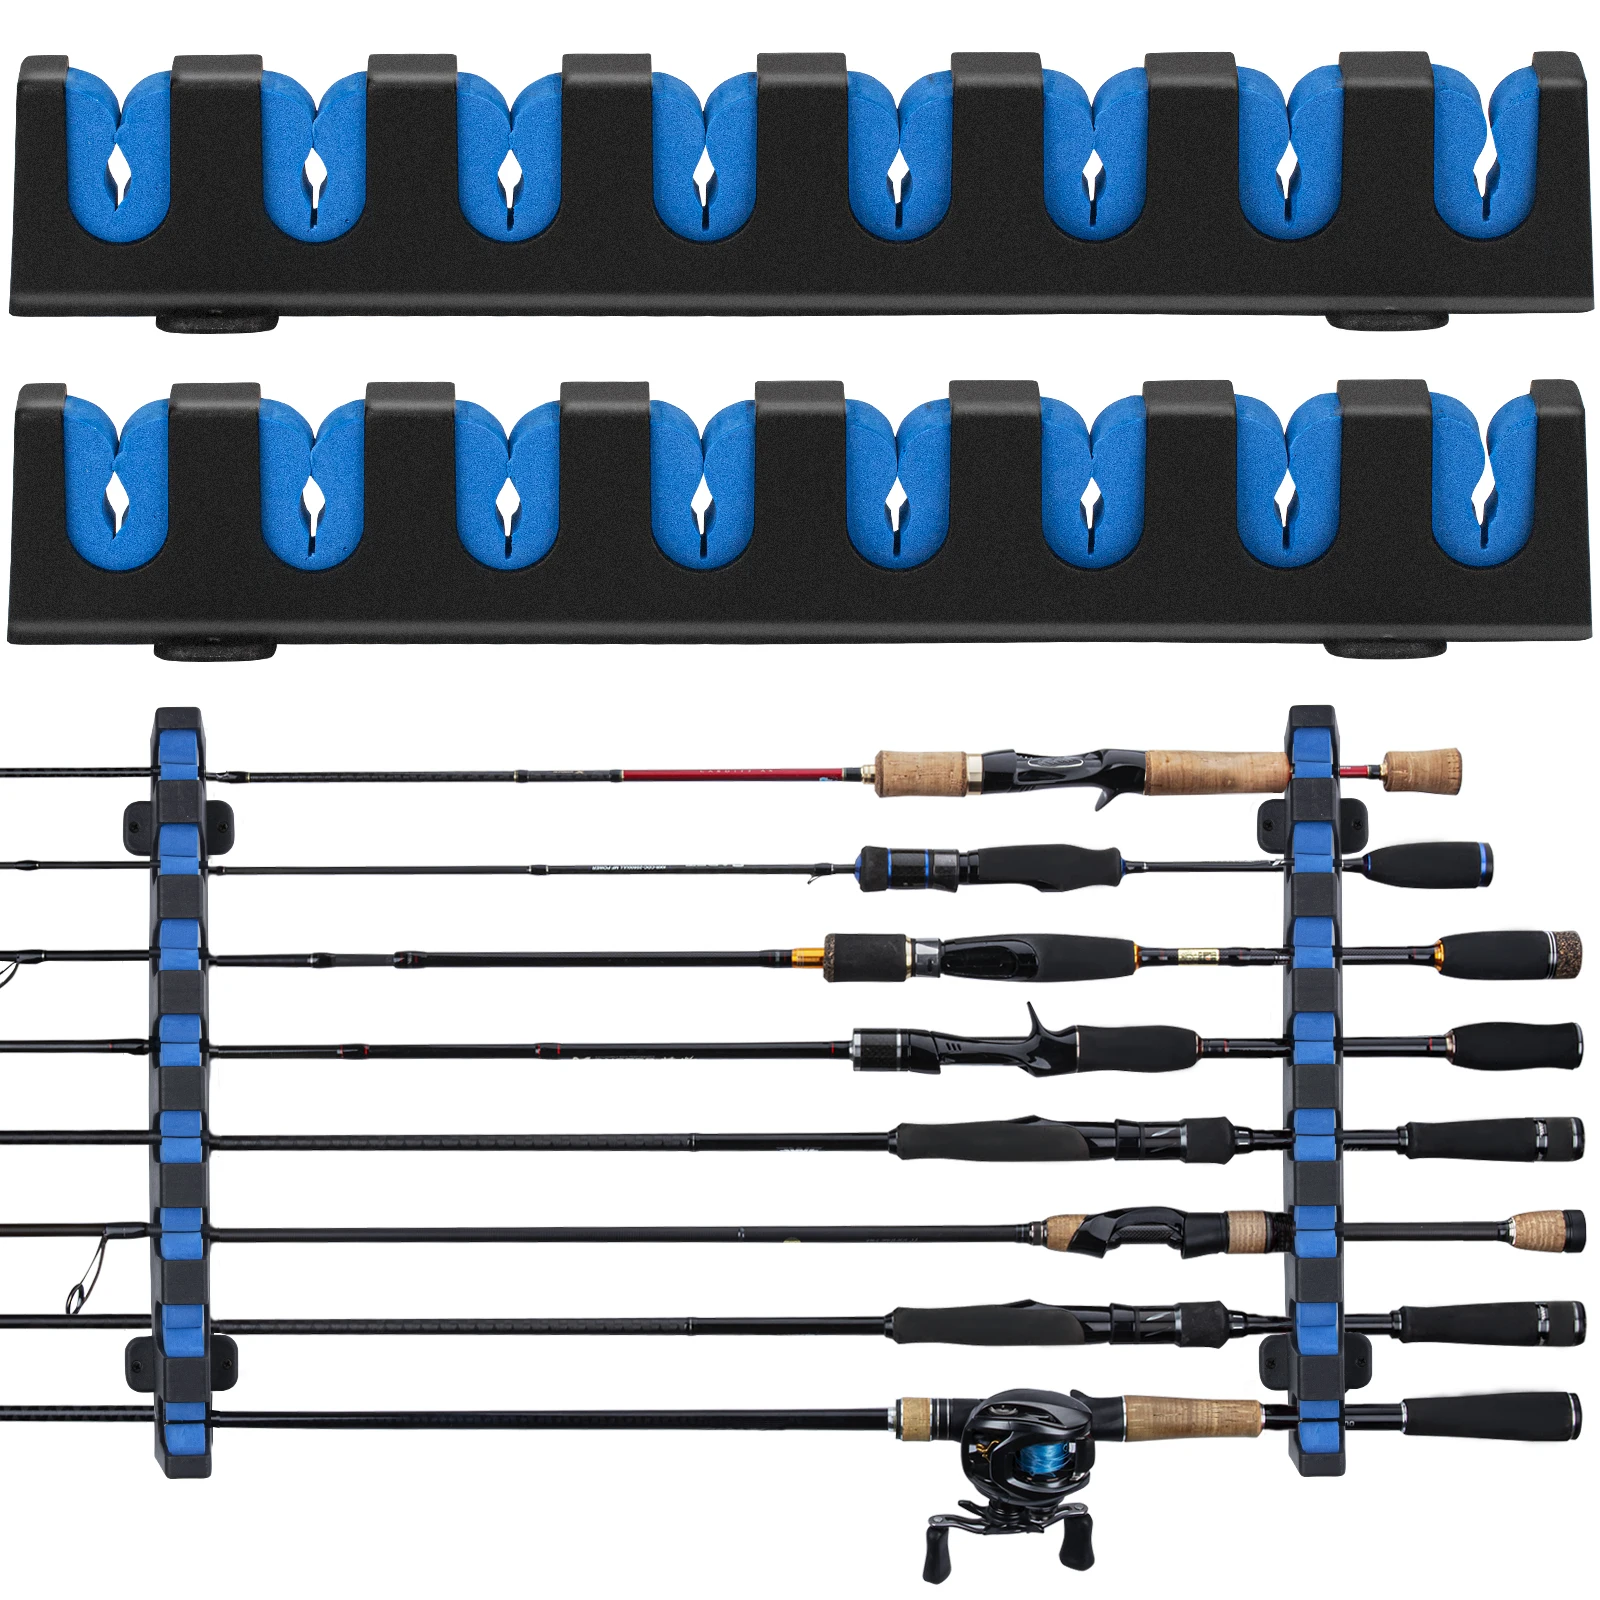 A Pair Fishing Rod Rack For 10 Rods Storage Pole Rod Holder Suit Ceiling  Wall Mount Garage Organizer Fishing Rod Accessories - AliExpress